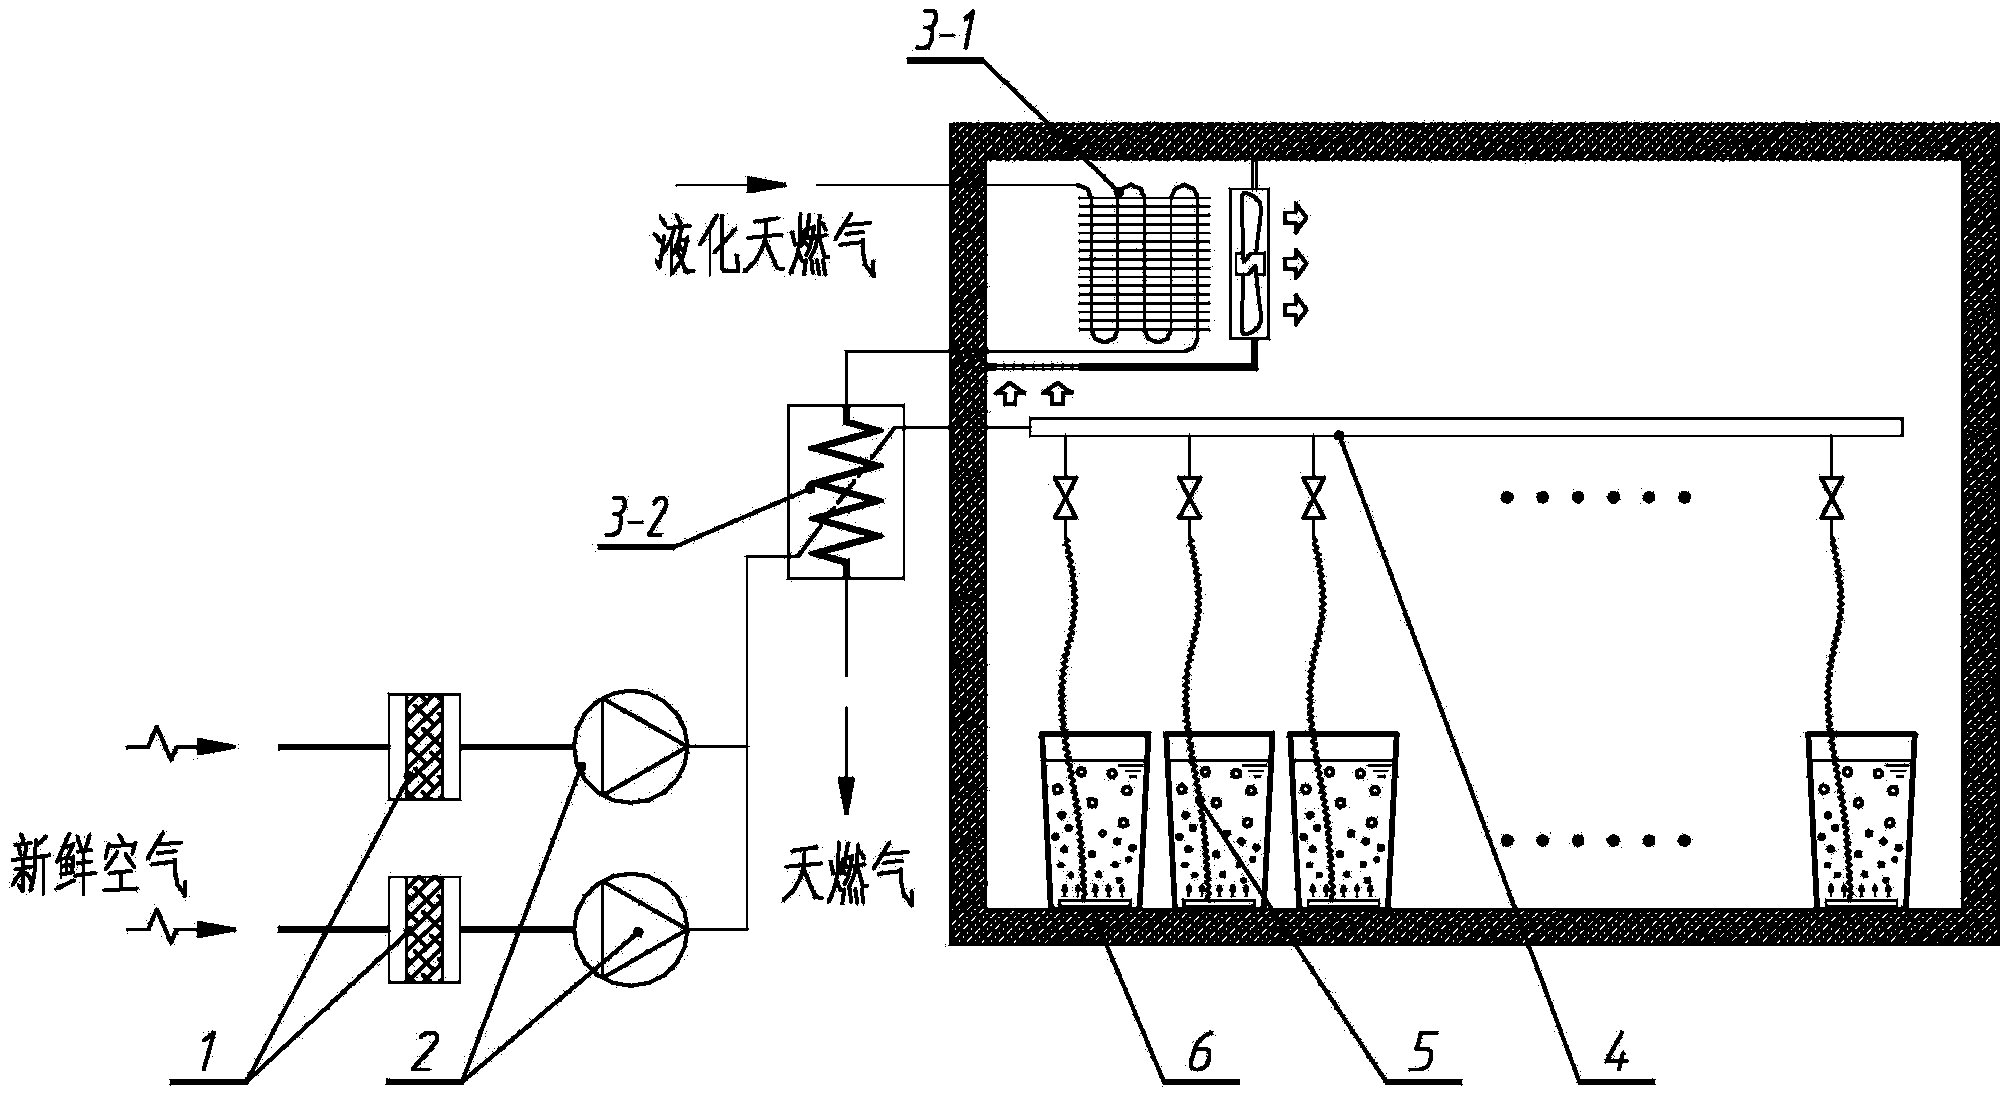 Low-temperature oxygenation compartment system for fresh aquatic product LNG transport vehicle